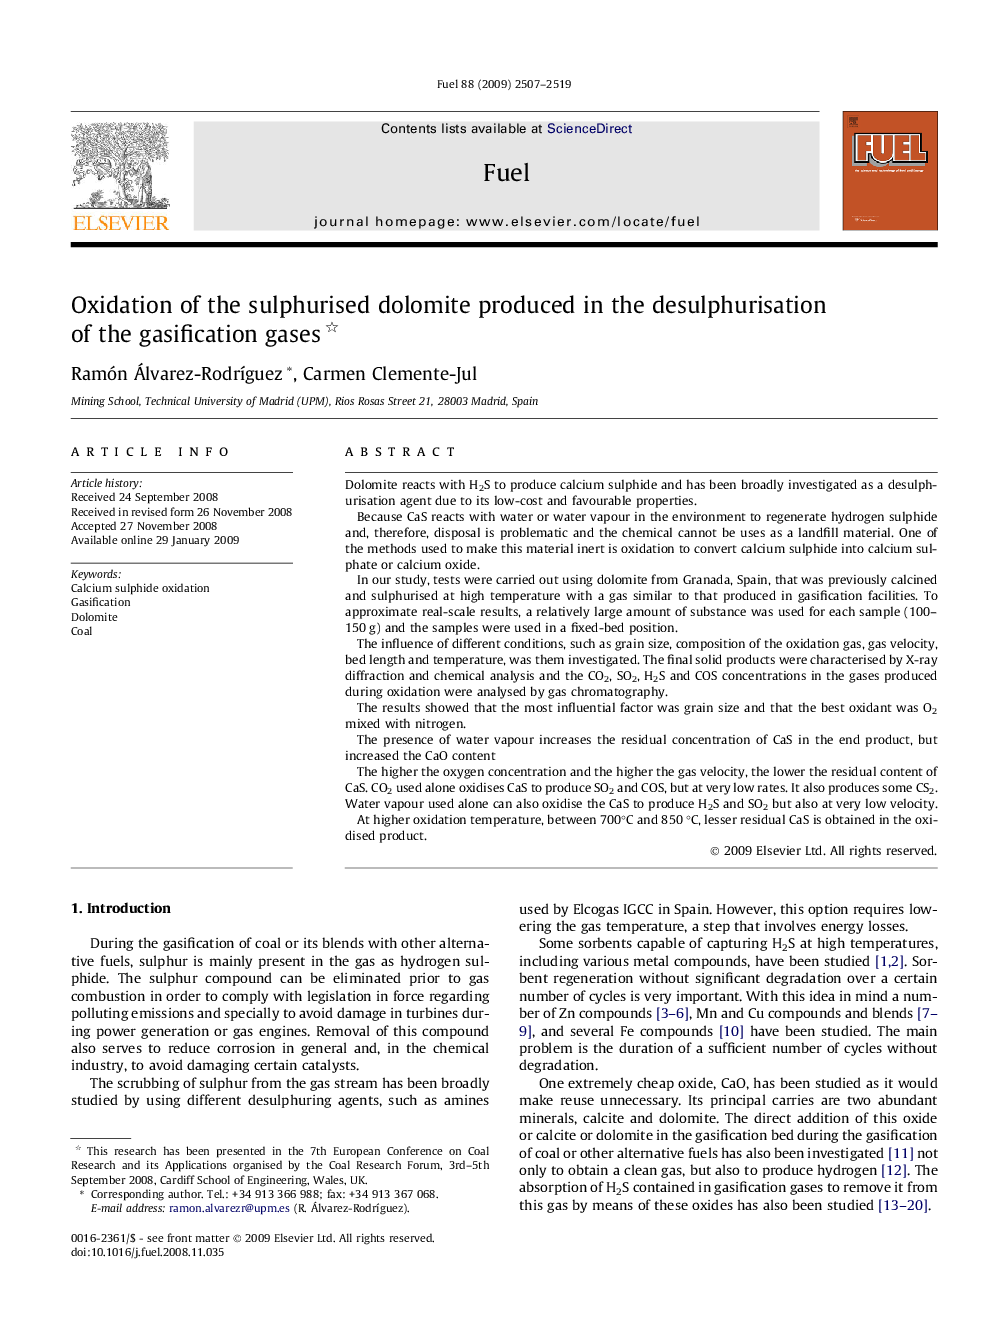 Oxidation of the sulphurised dolomite produced in the desulphurisation of the gasification gases 